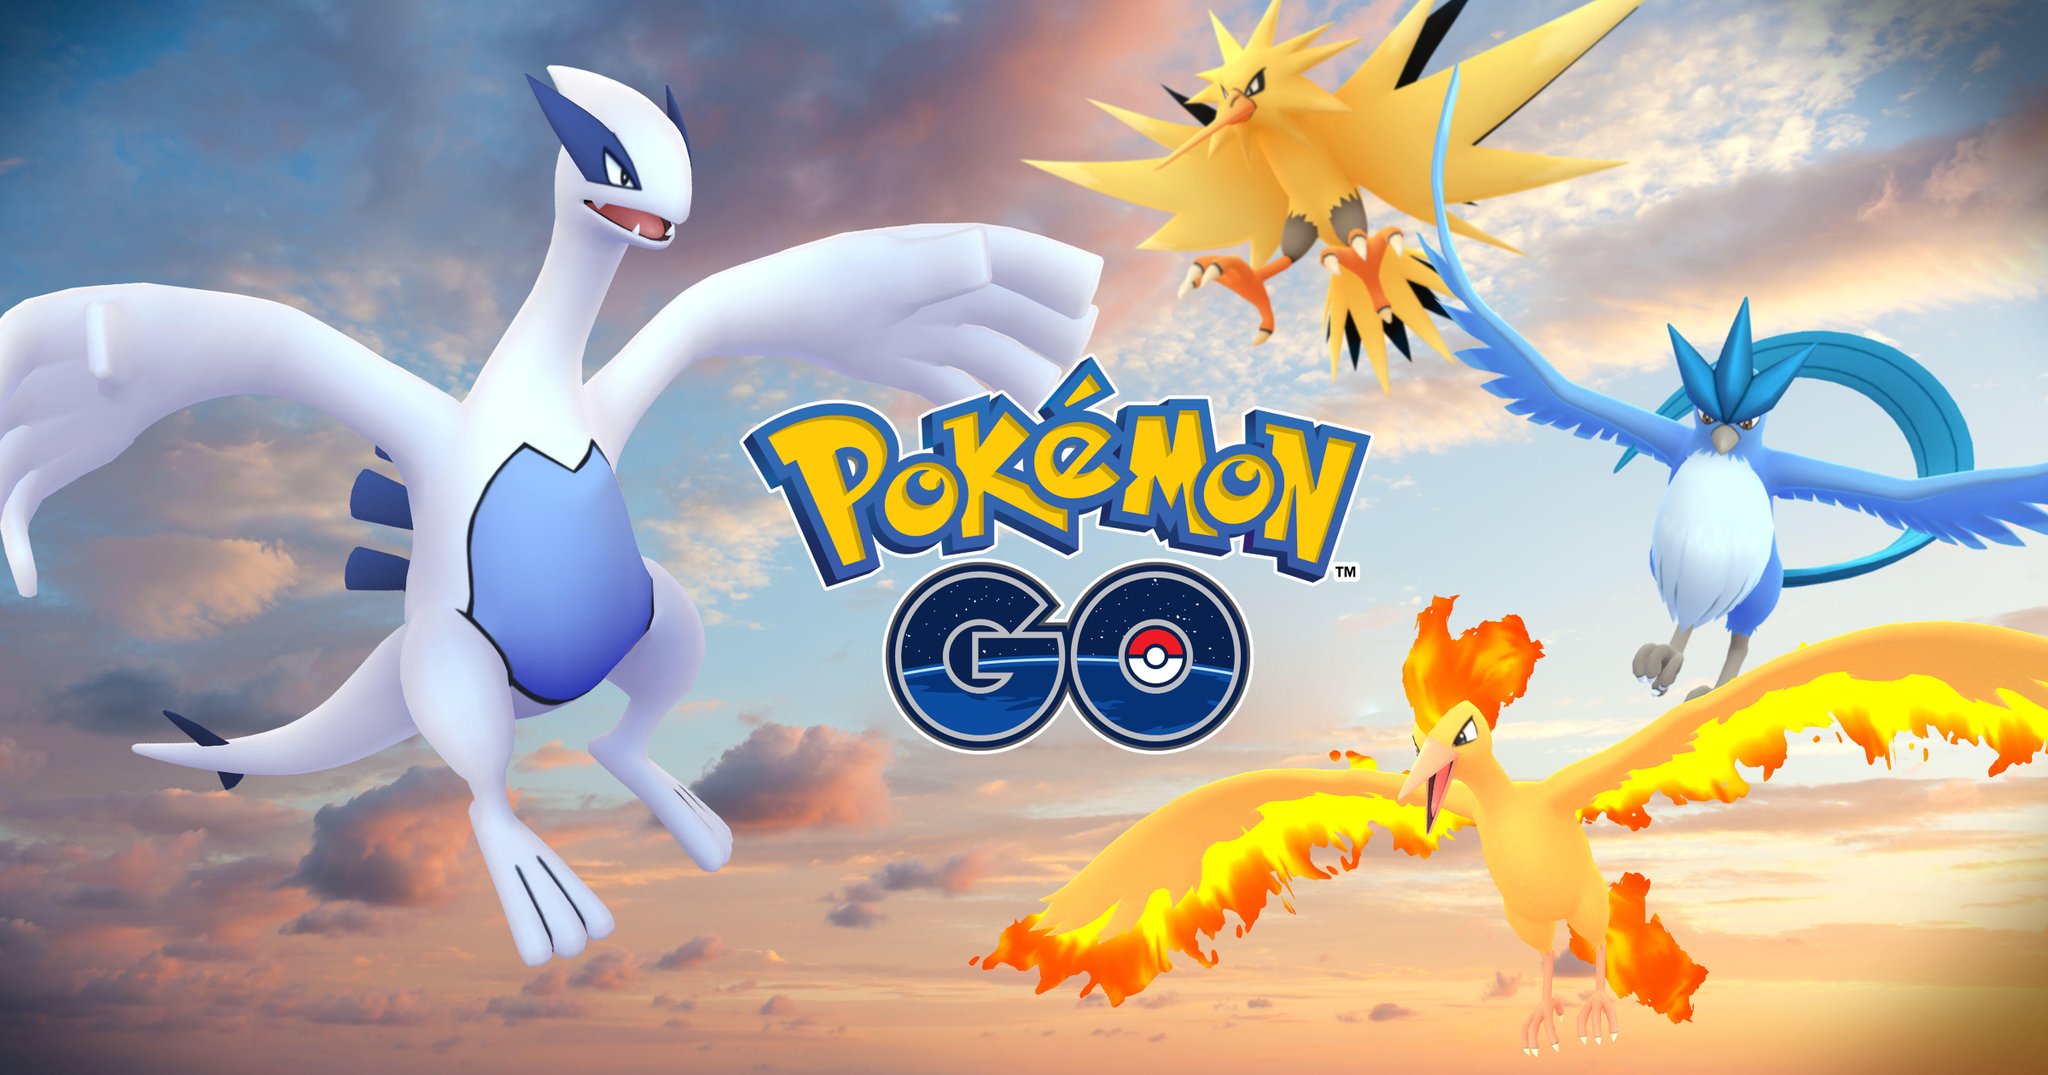 'Pokemon GO' Legendary Raid Times for Articuno, Zapdos and Moltres Have Been Announced, but Good Luck Catching Any of Them